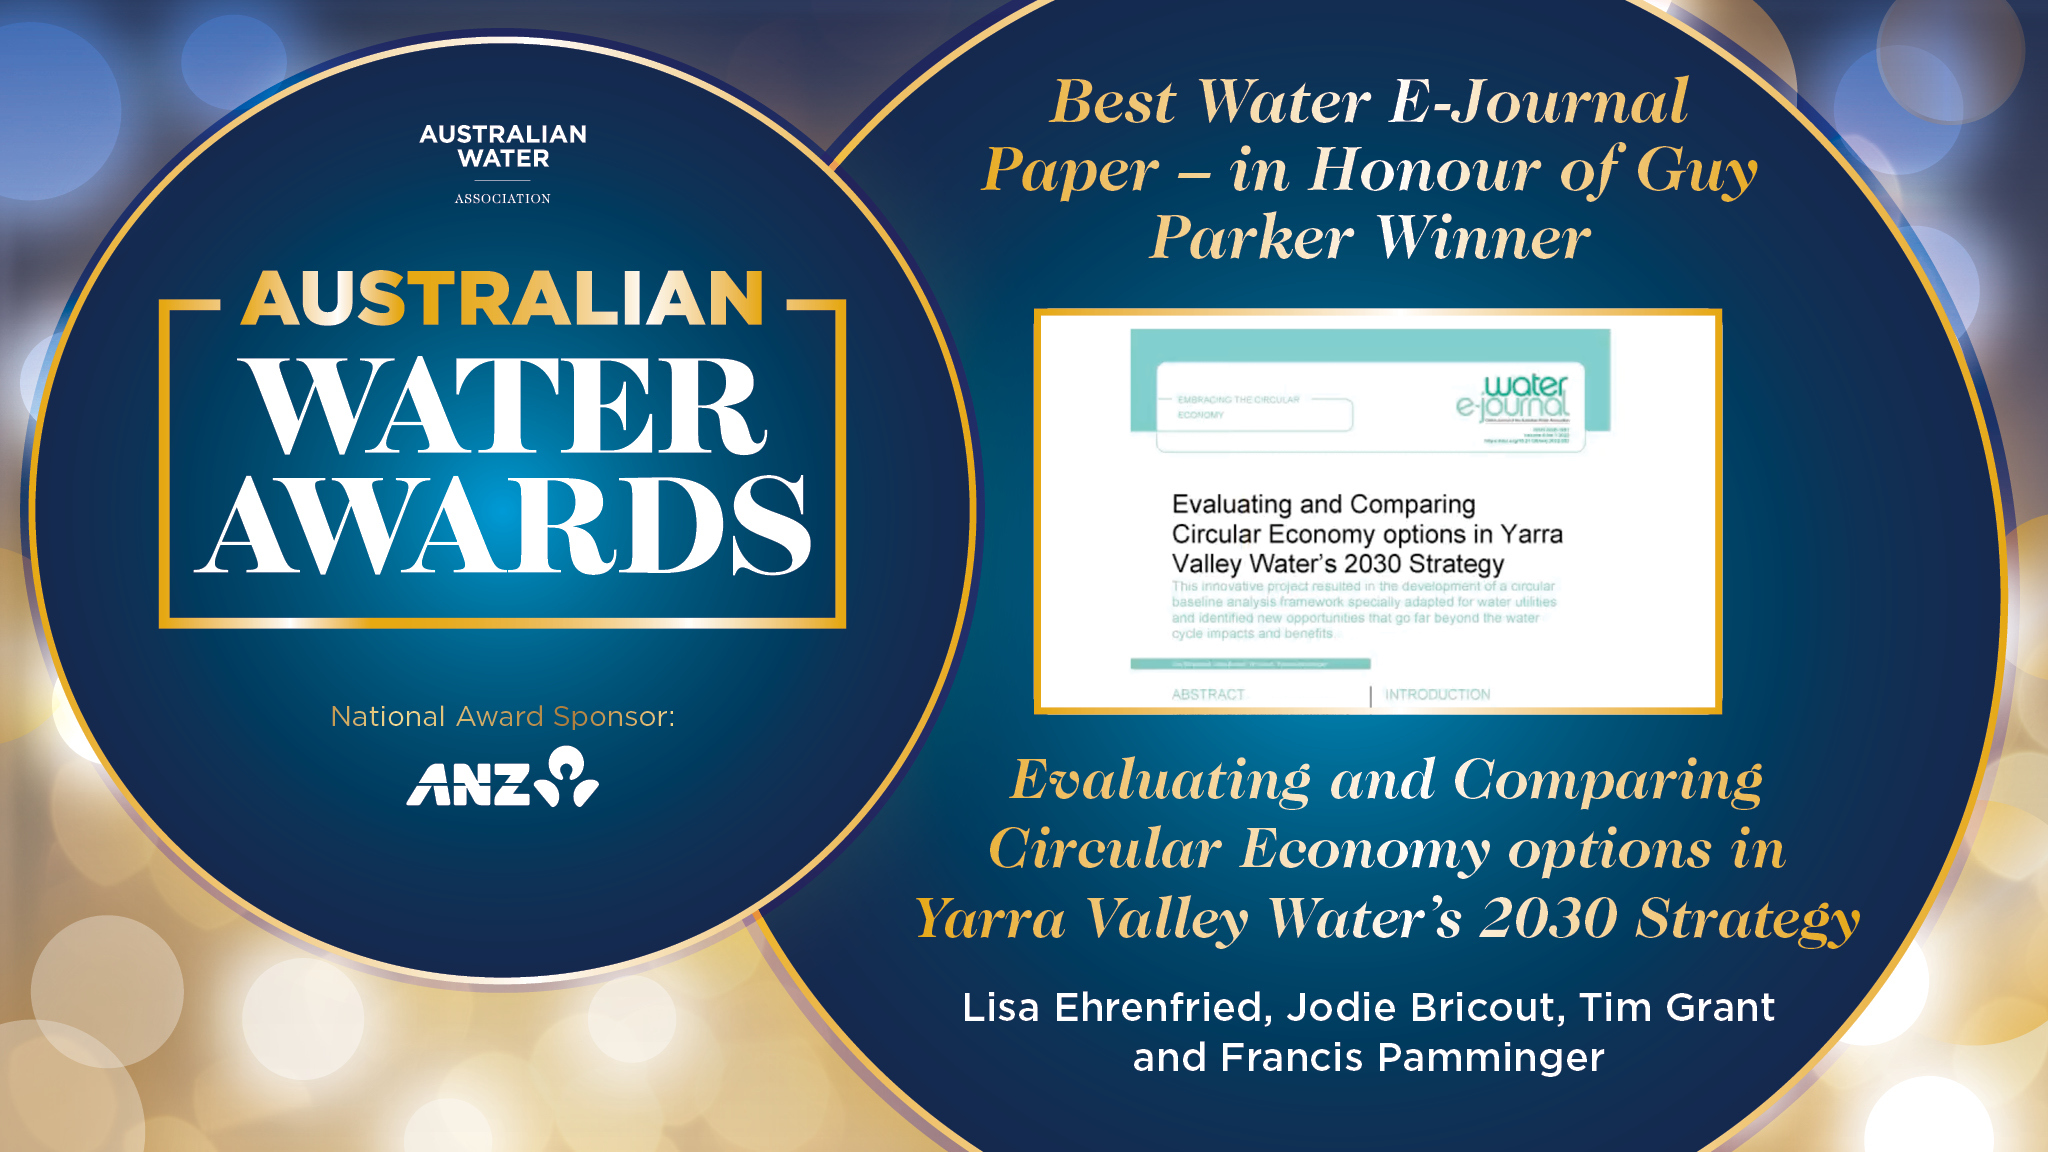 7. Best Water EJournal_Awards